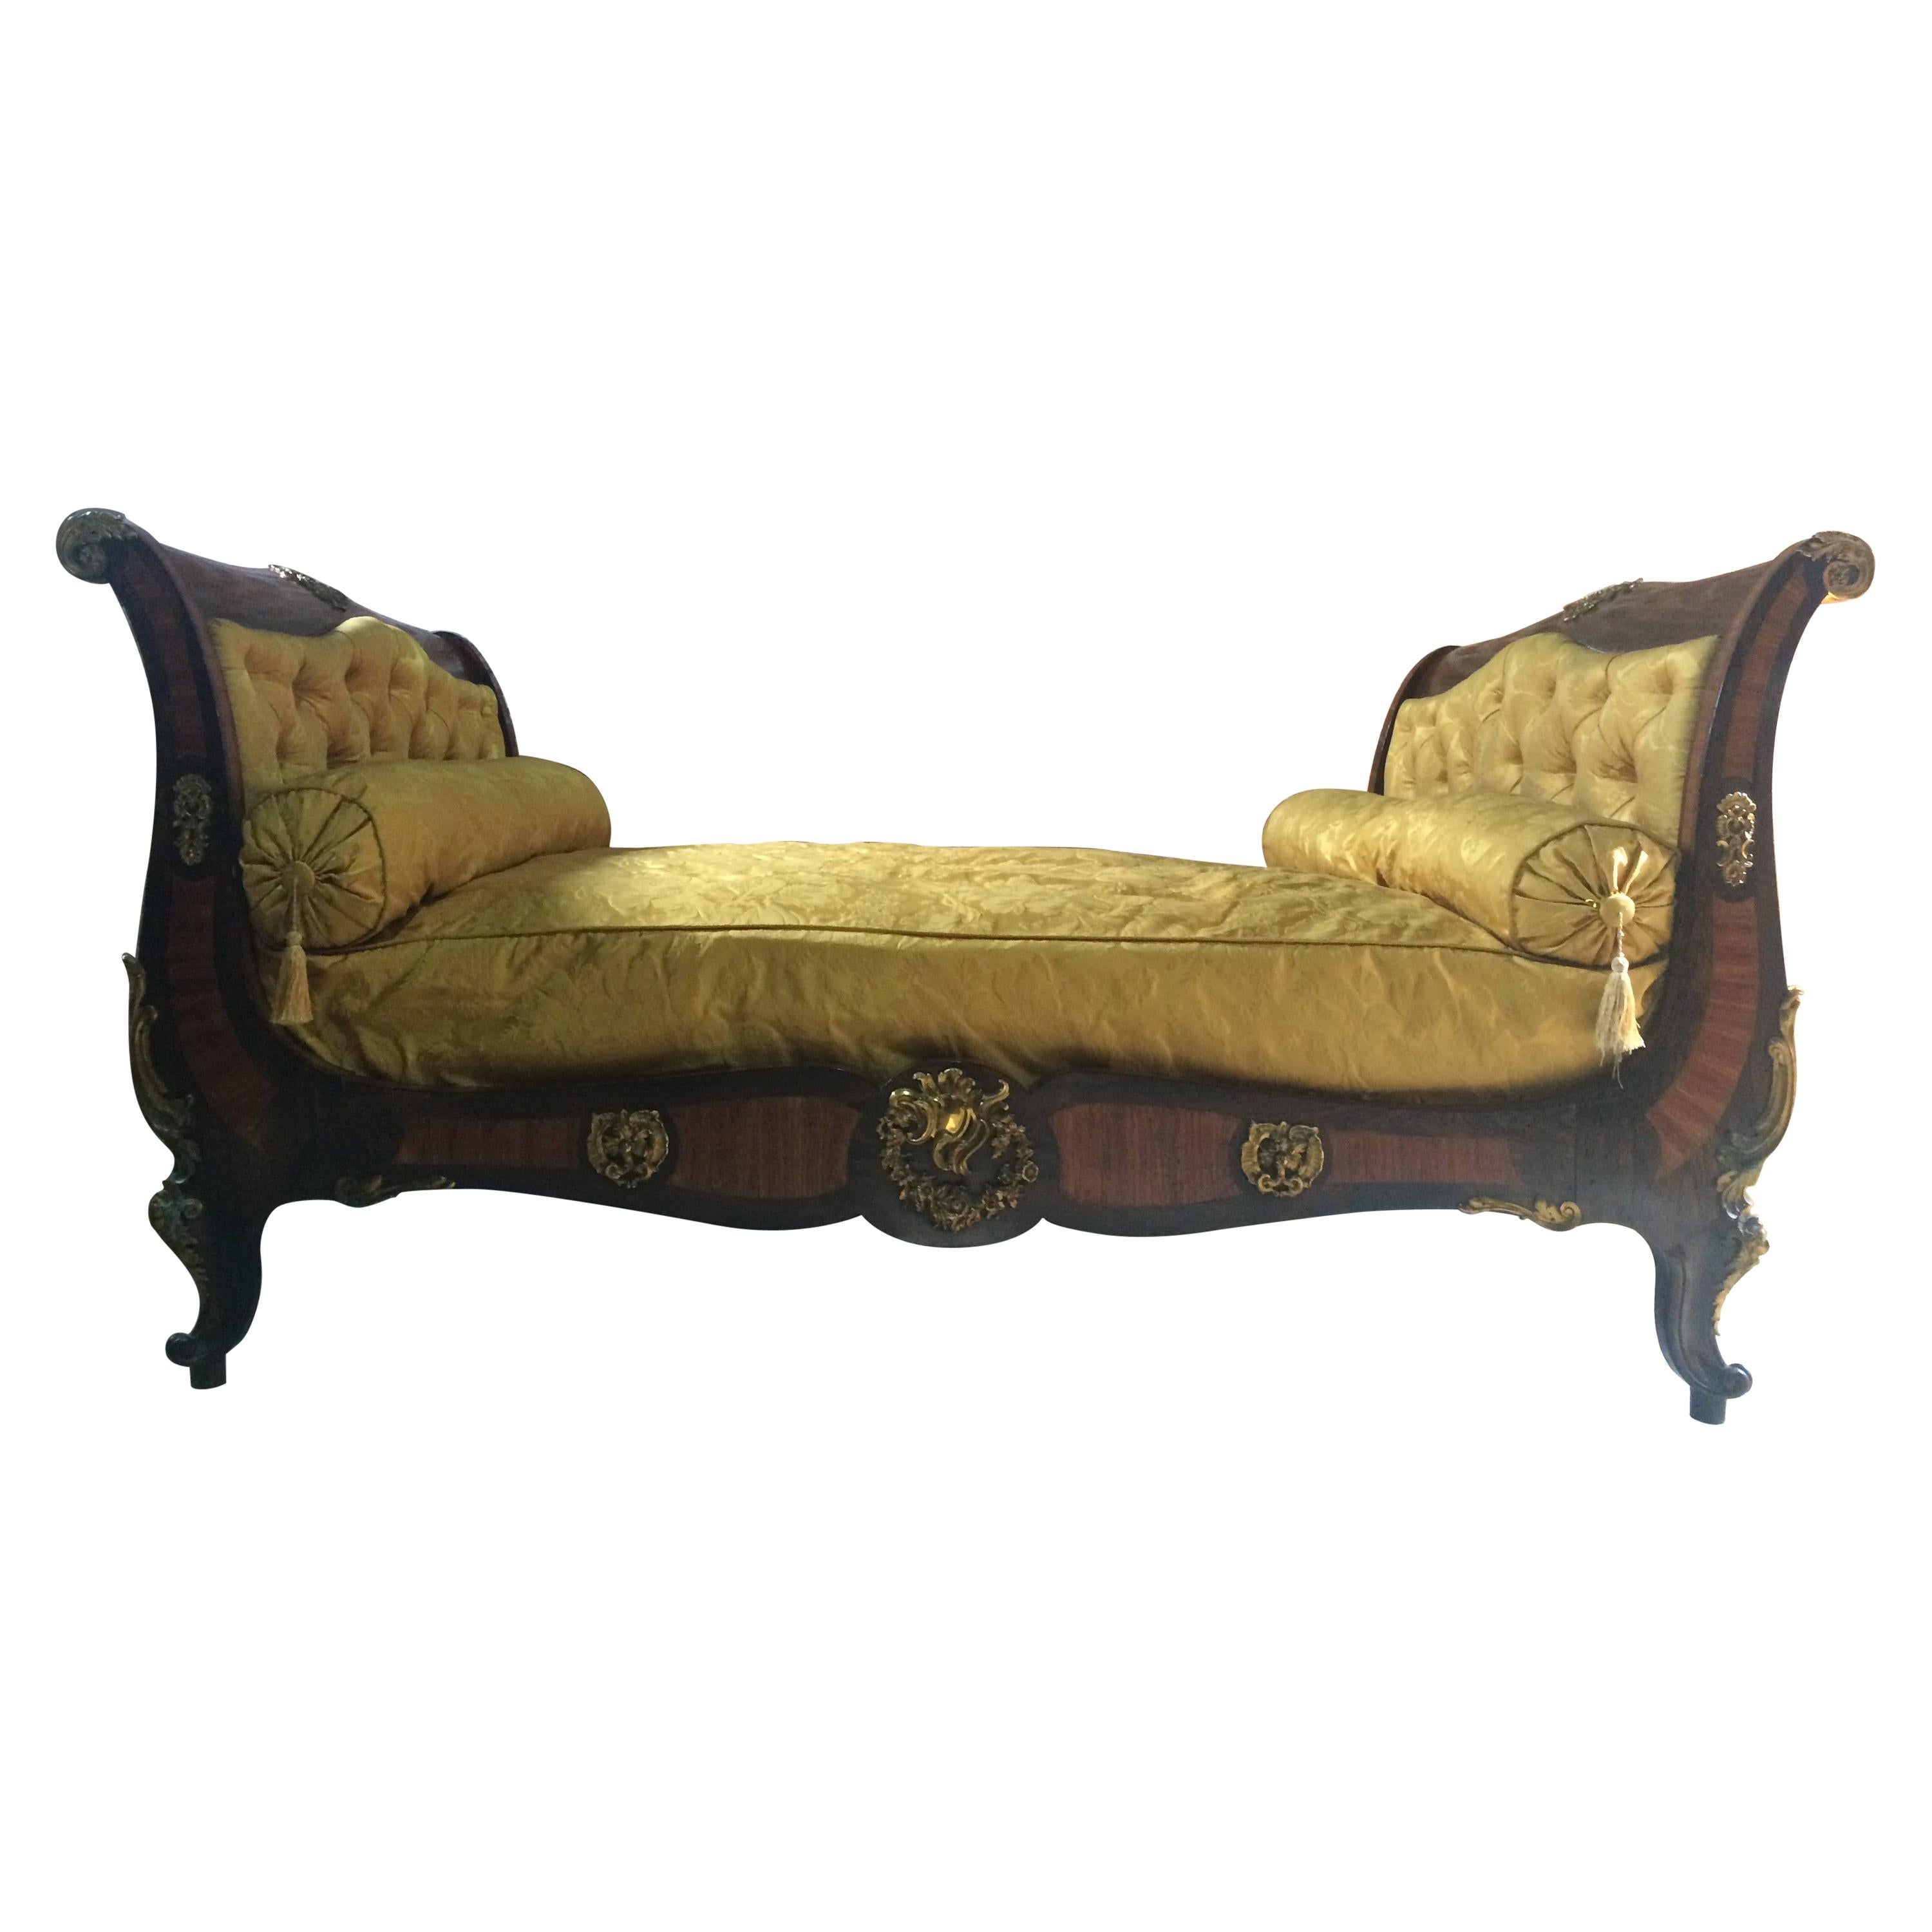 Antique Daybed Bed Lit en Bateau French Louis XV Style 19th Century, circa 1815